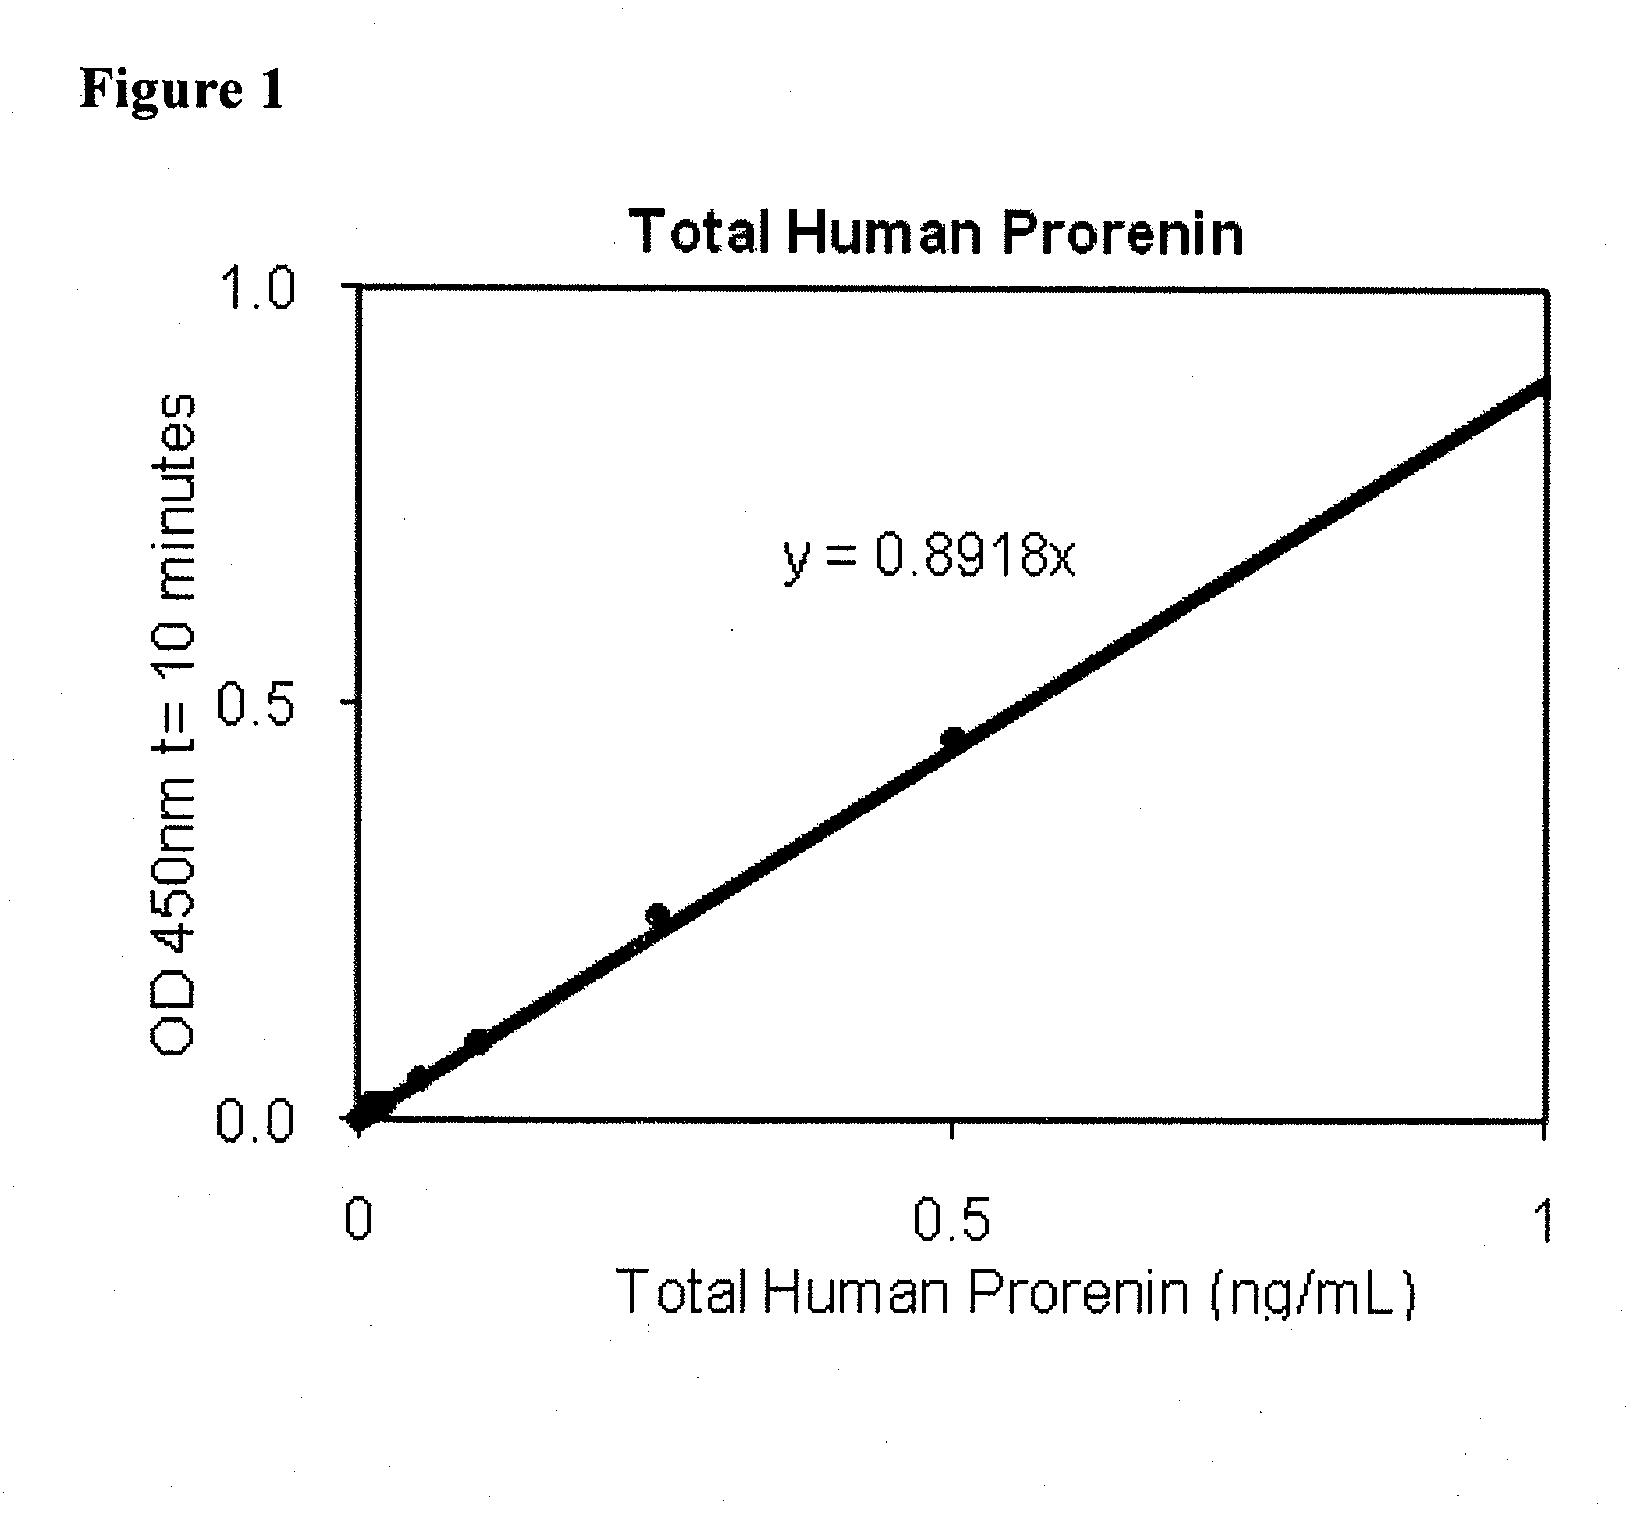 Methods For Screening Candidate Agents For Modulating Prorenin And Renin, Assays for Detecting Prorenin And Antibodies